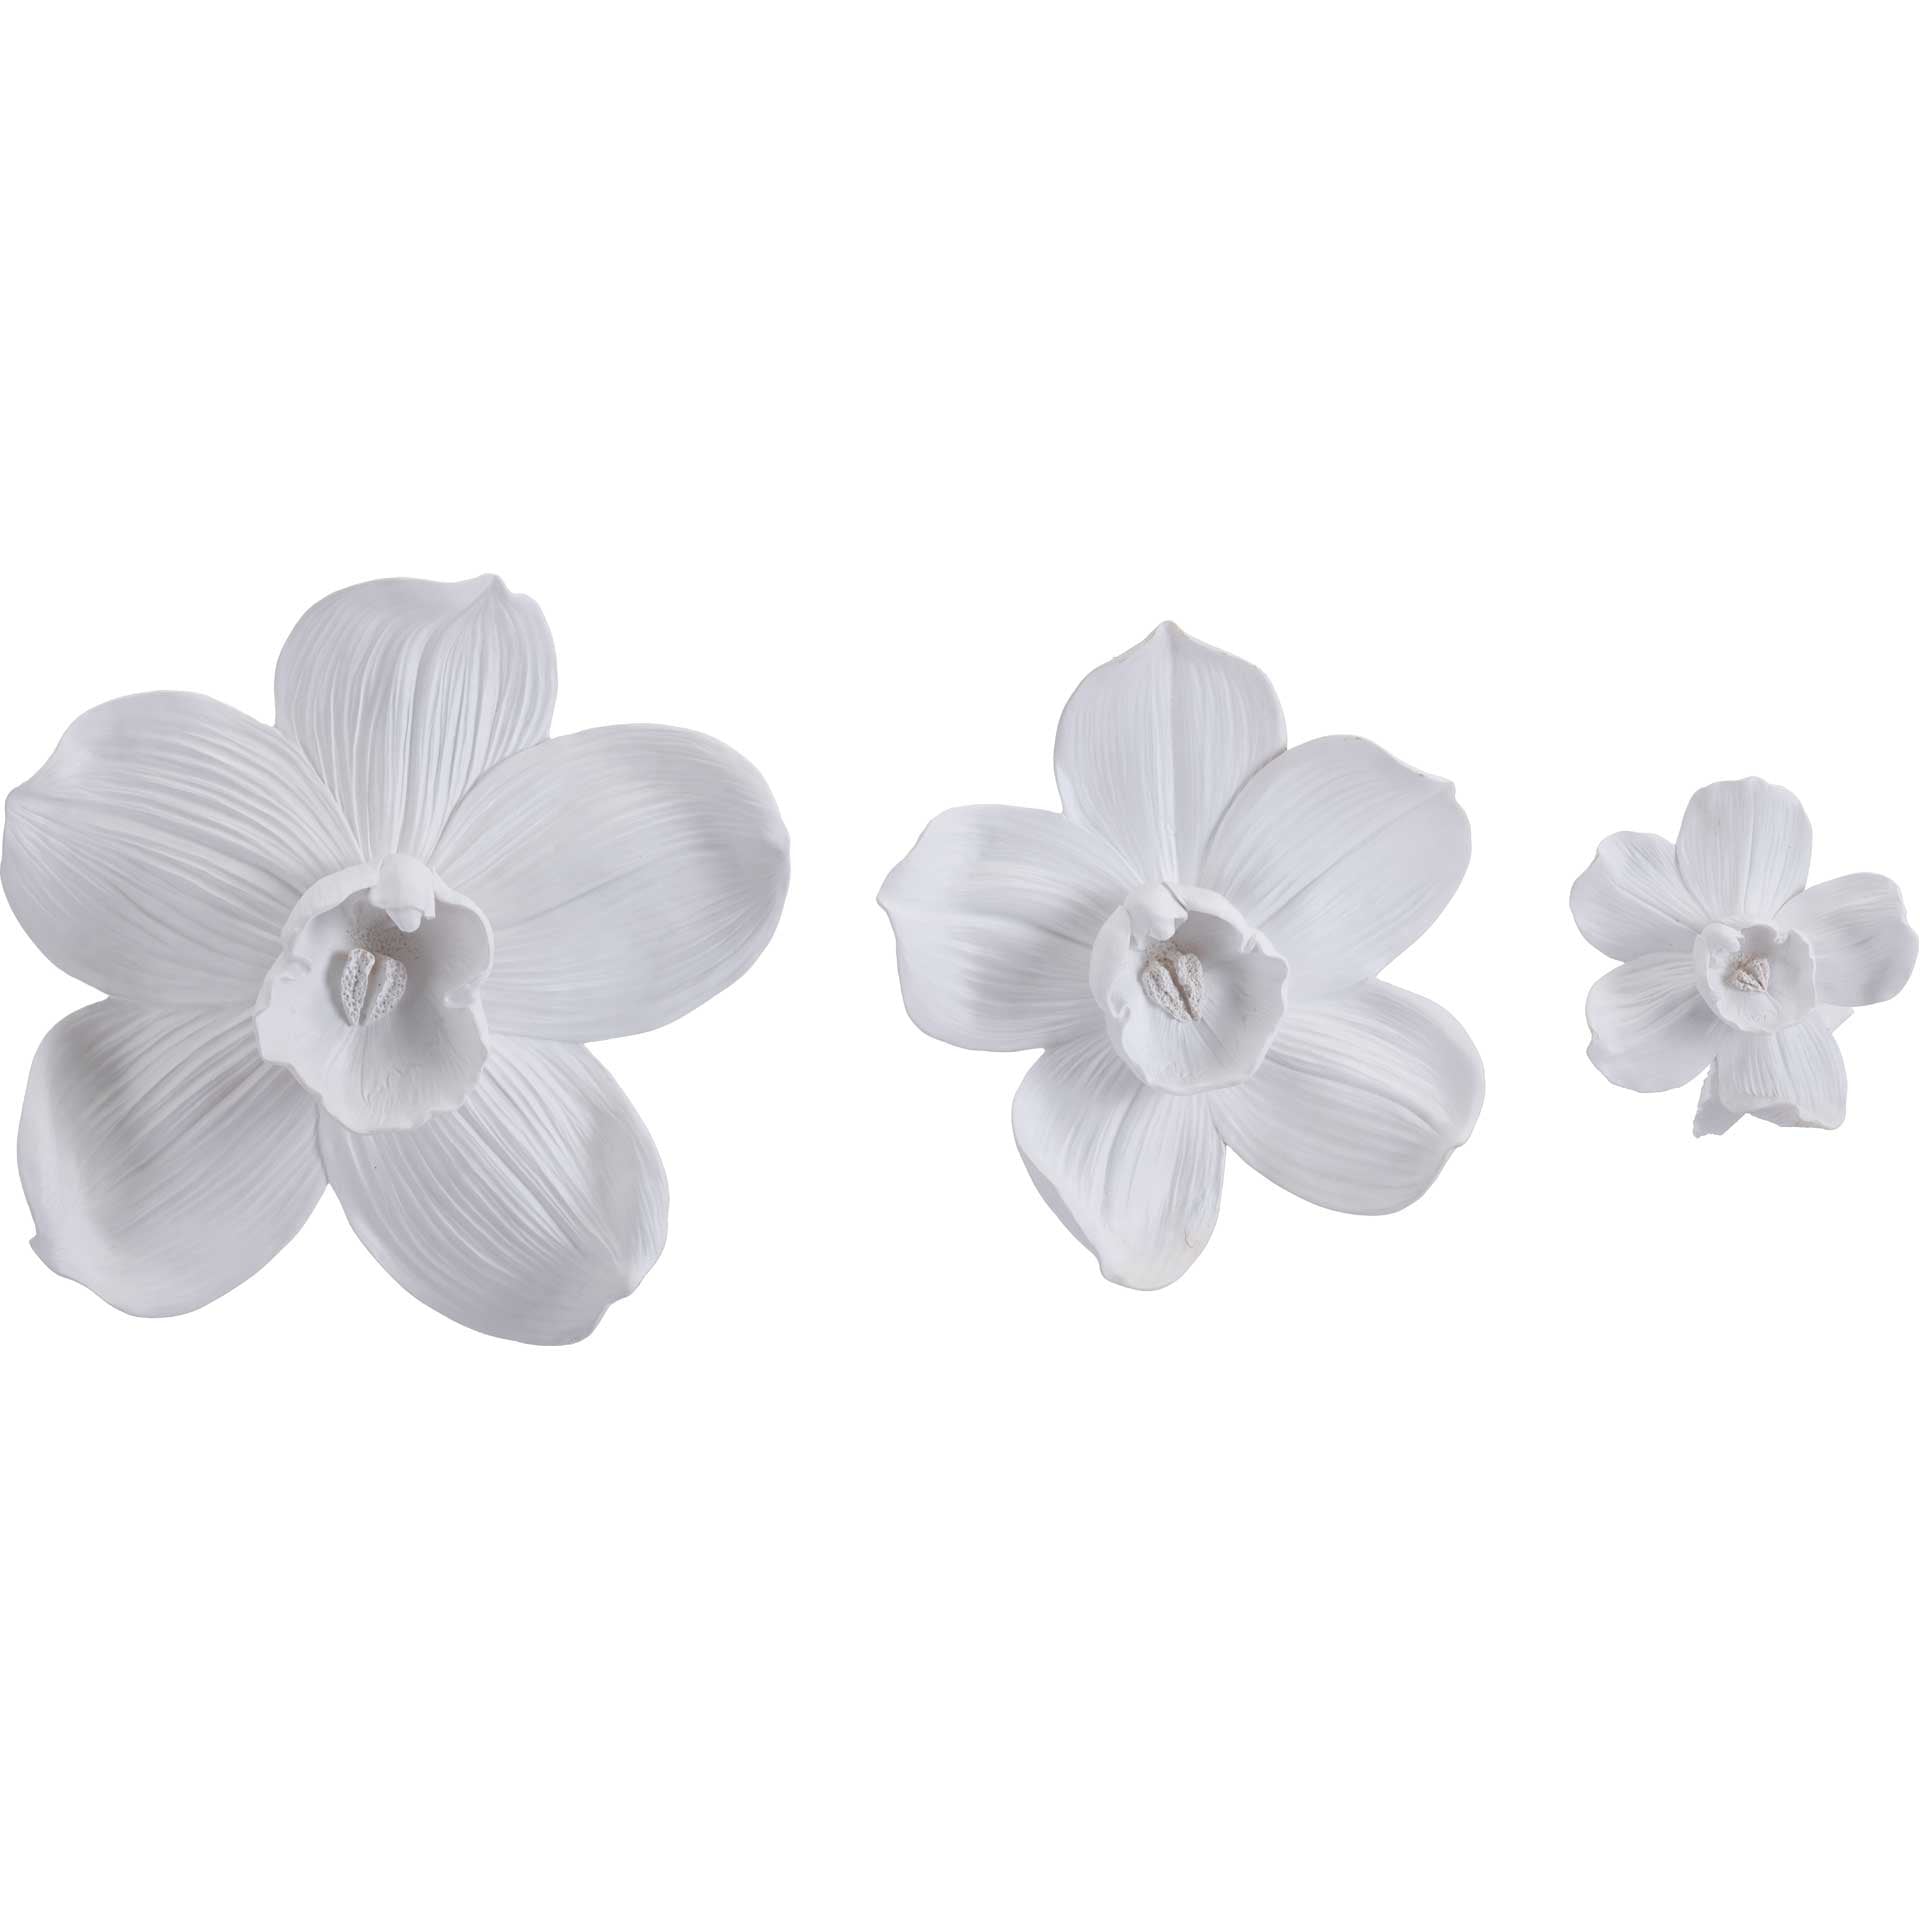 Orchid Wall Decor White